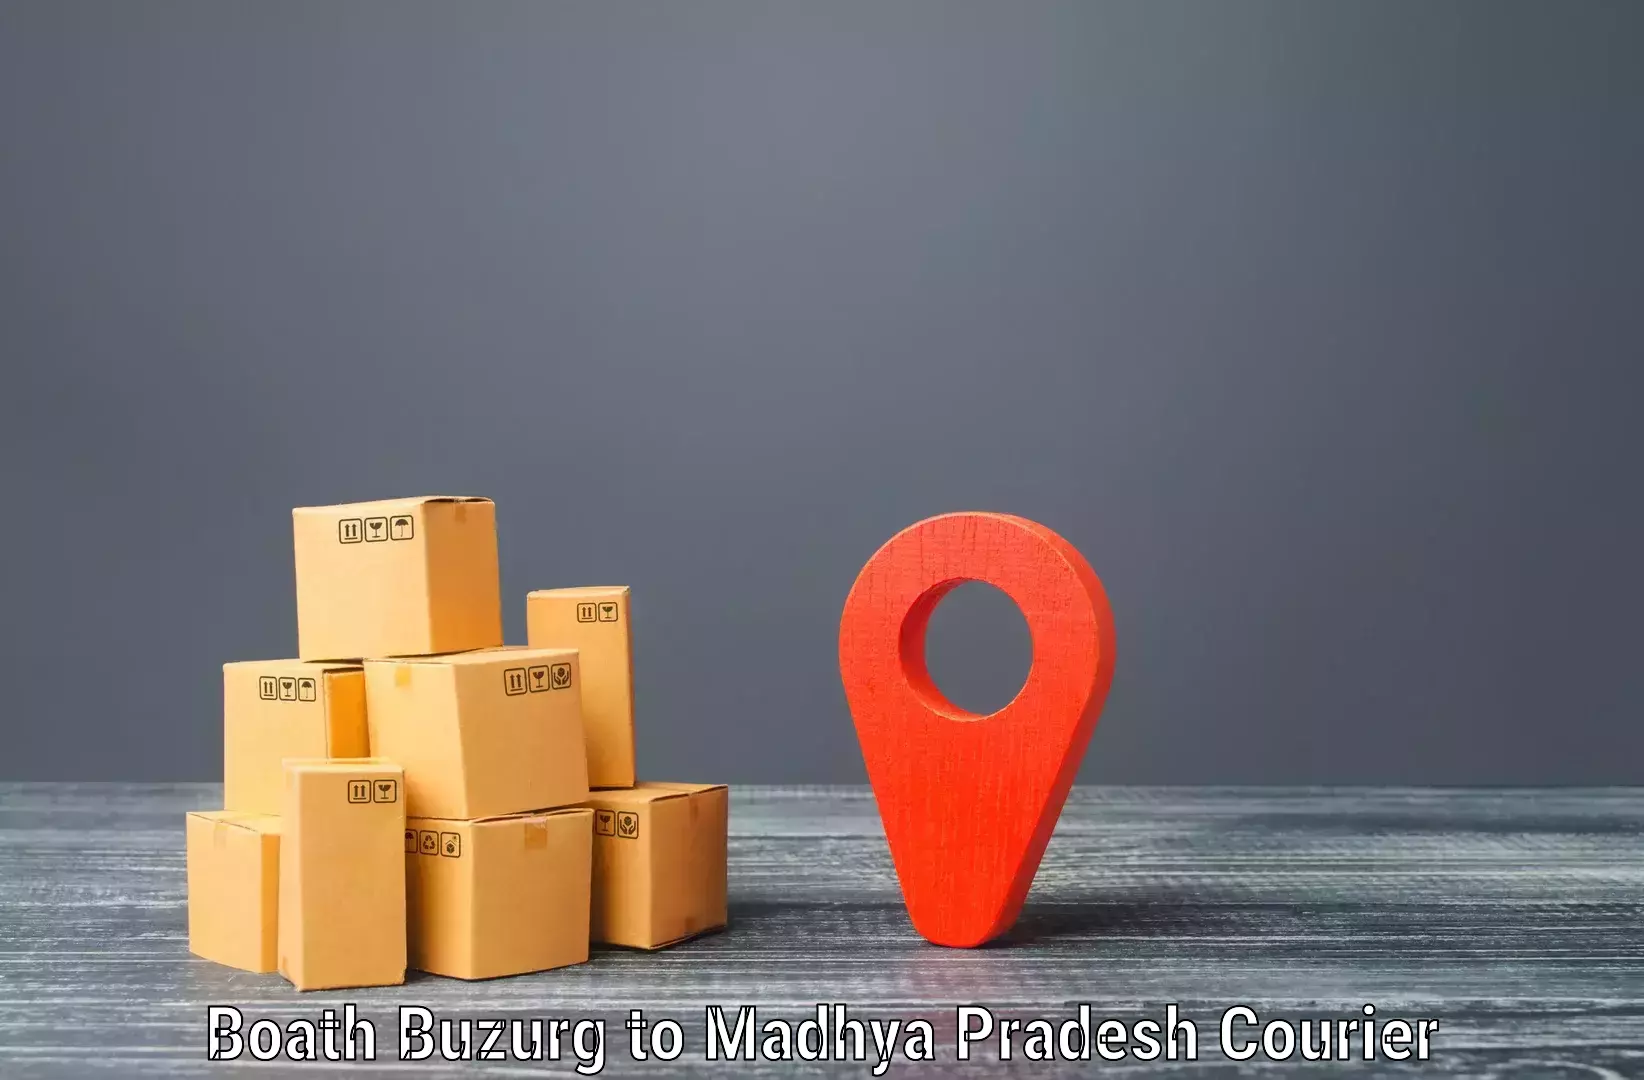 Quality courier services Boath Buzurg to Madhya Pradesh